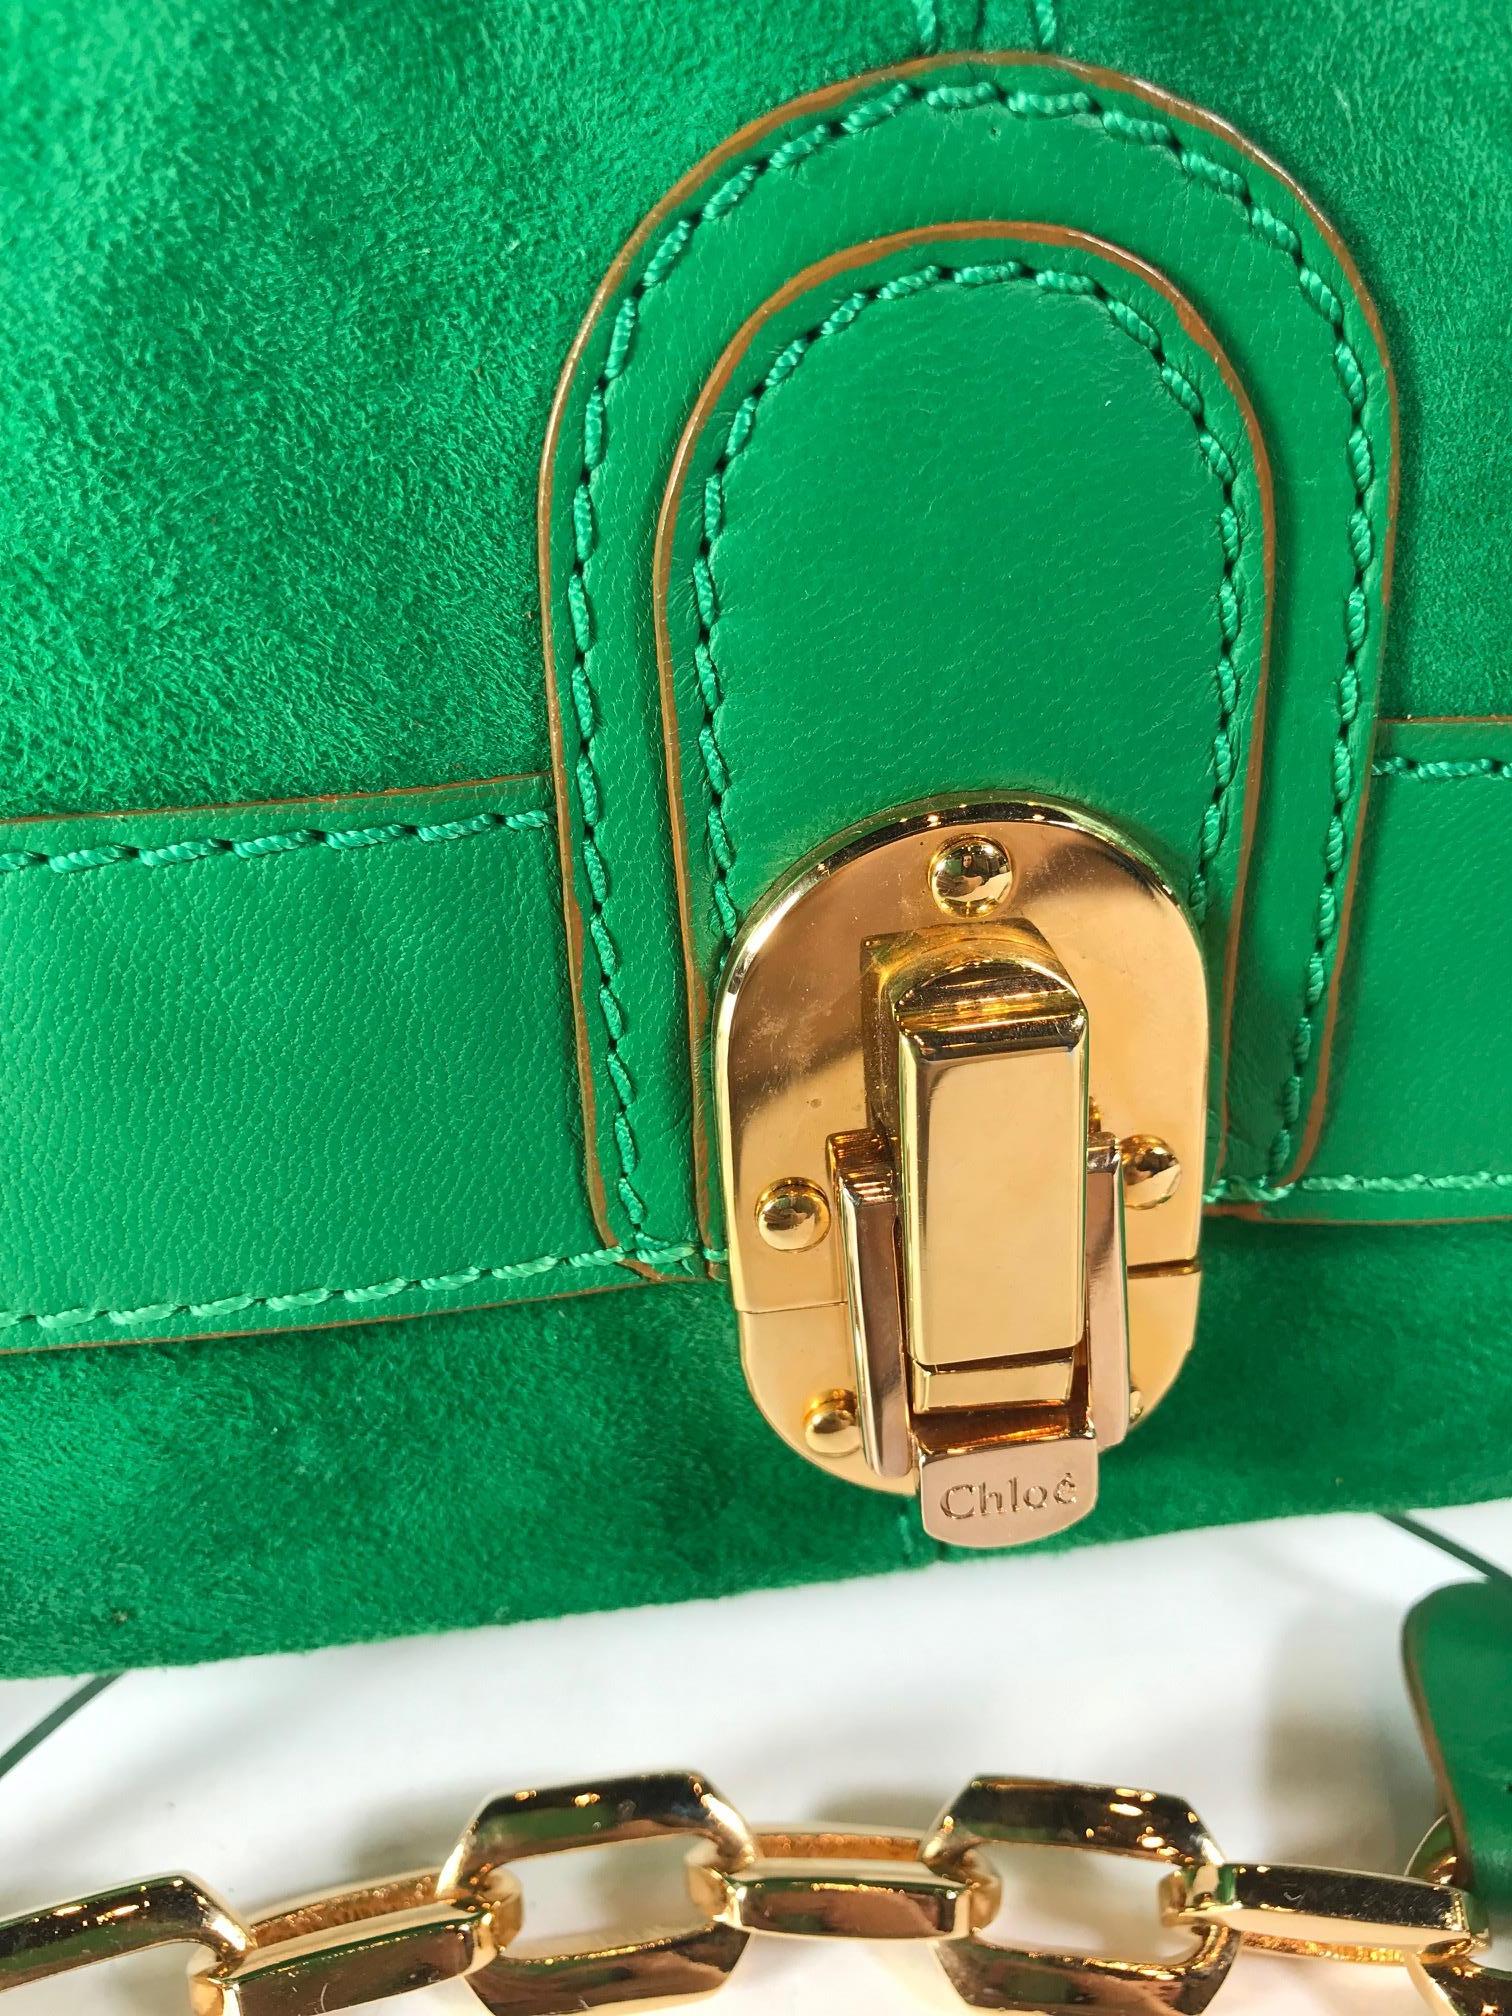 From the 2008 collection. Bottle green suede and leather detail. Gold-tone hardware. Front flap closure. Single chain link shoulder strap. Nude pink satin interior. One interior zippered pocket.